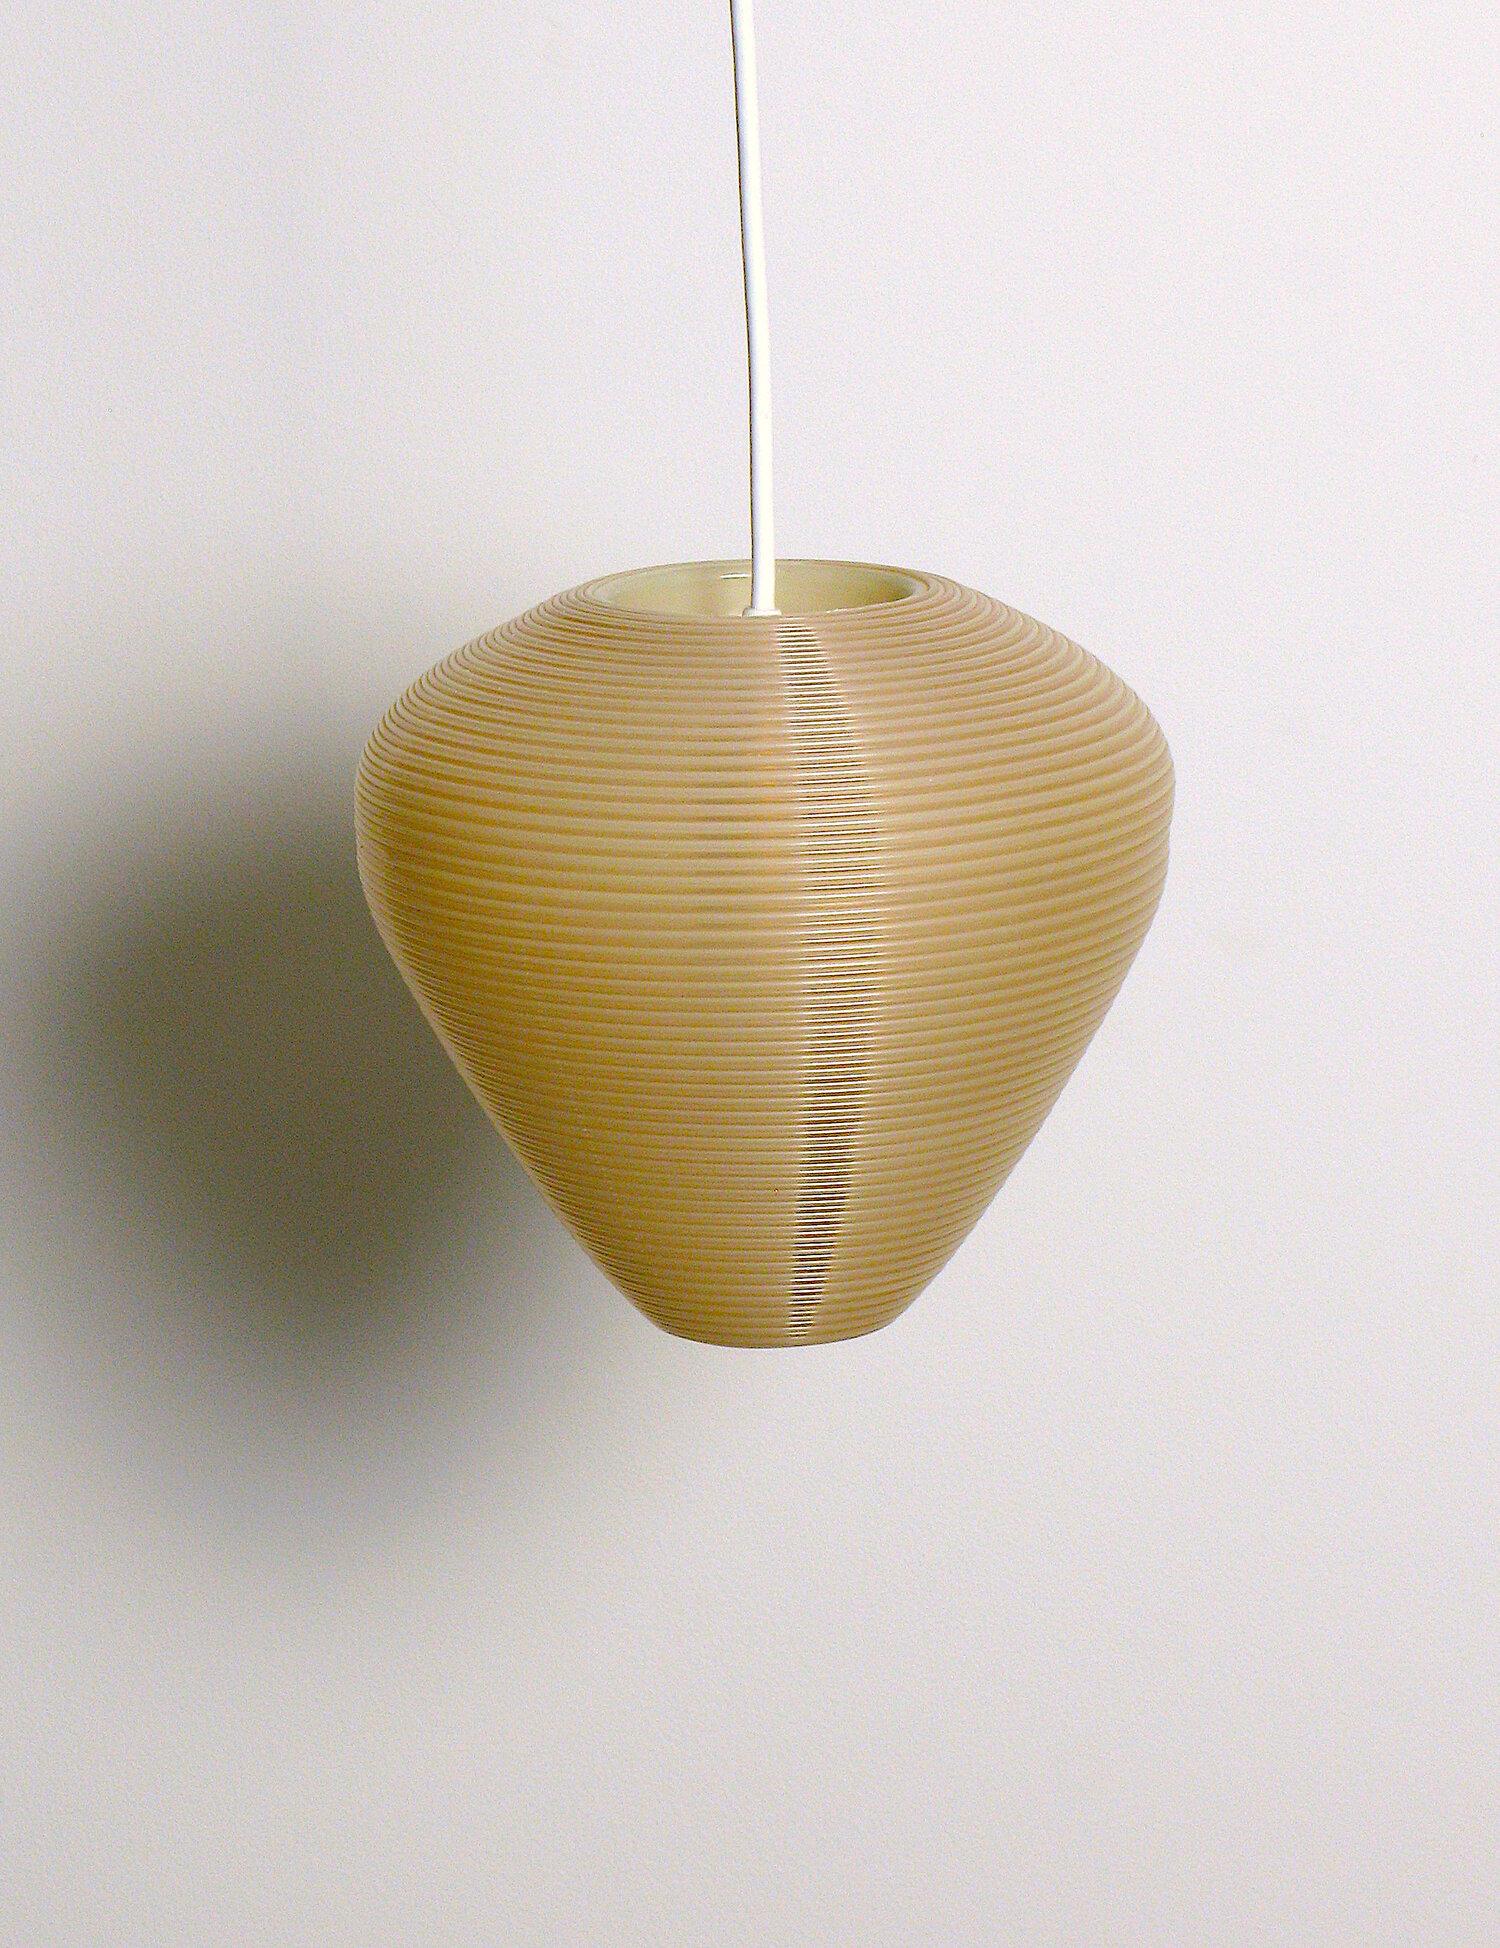 Rotaflex pendant lamp designed by John and Sylvia Reid and manufactured by Rotaflex in the 1950’s. Ribbed cellulose acetate shade. 60 watts E-26 medium based incandescent bulb recommended or higher if LED/CFL.
Rewired with E-26 Edison medium base